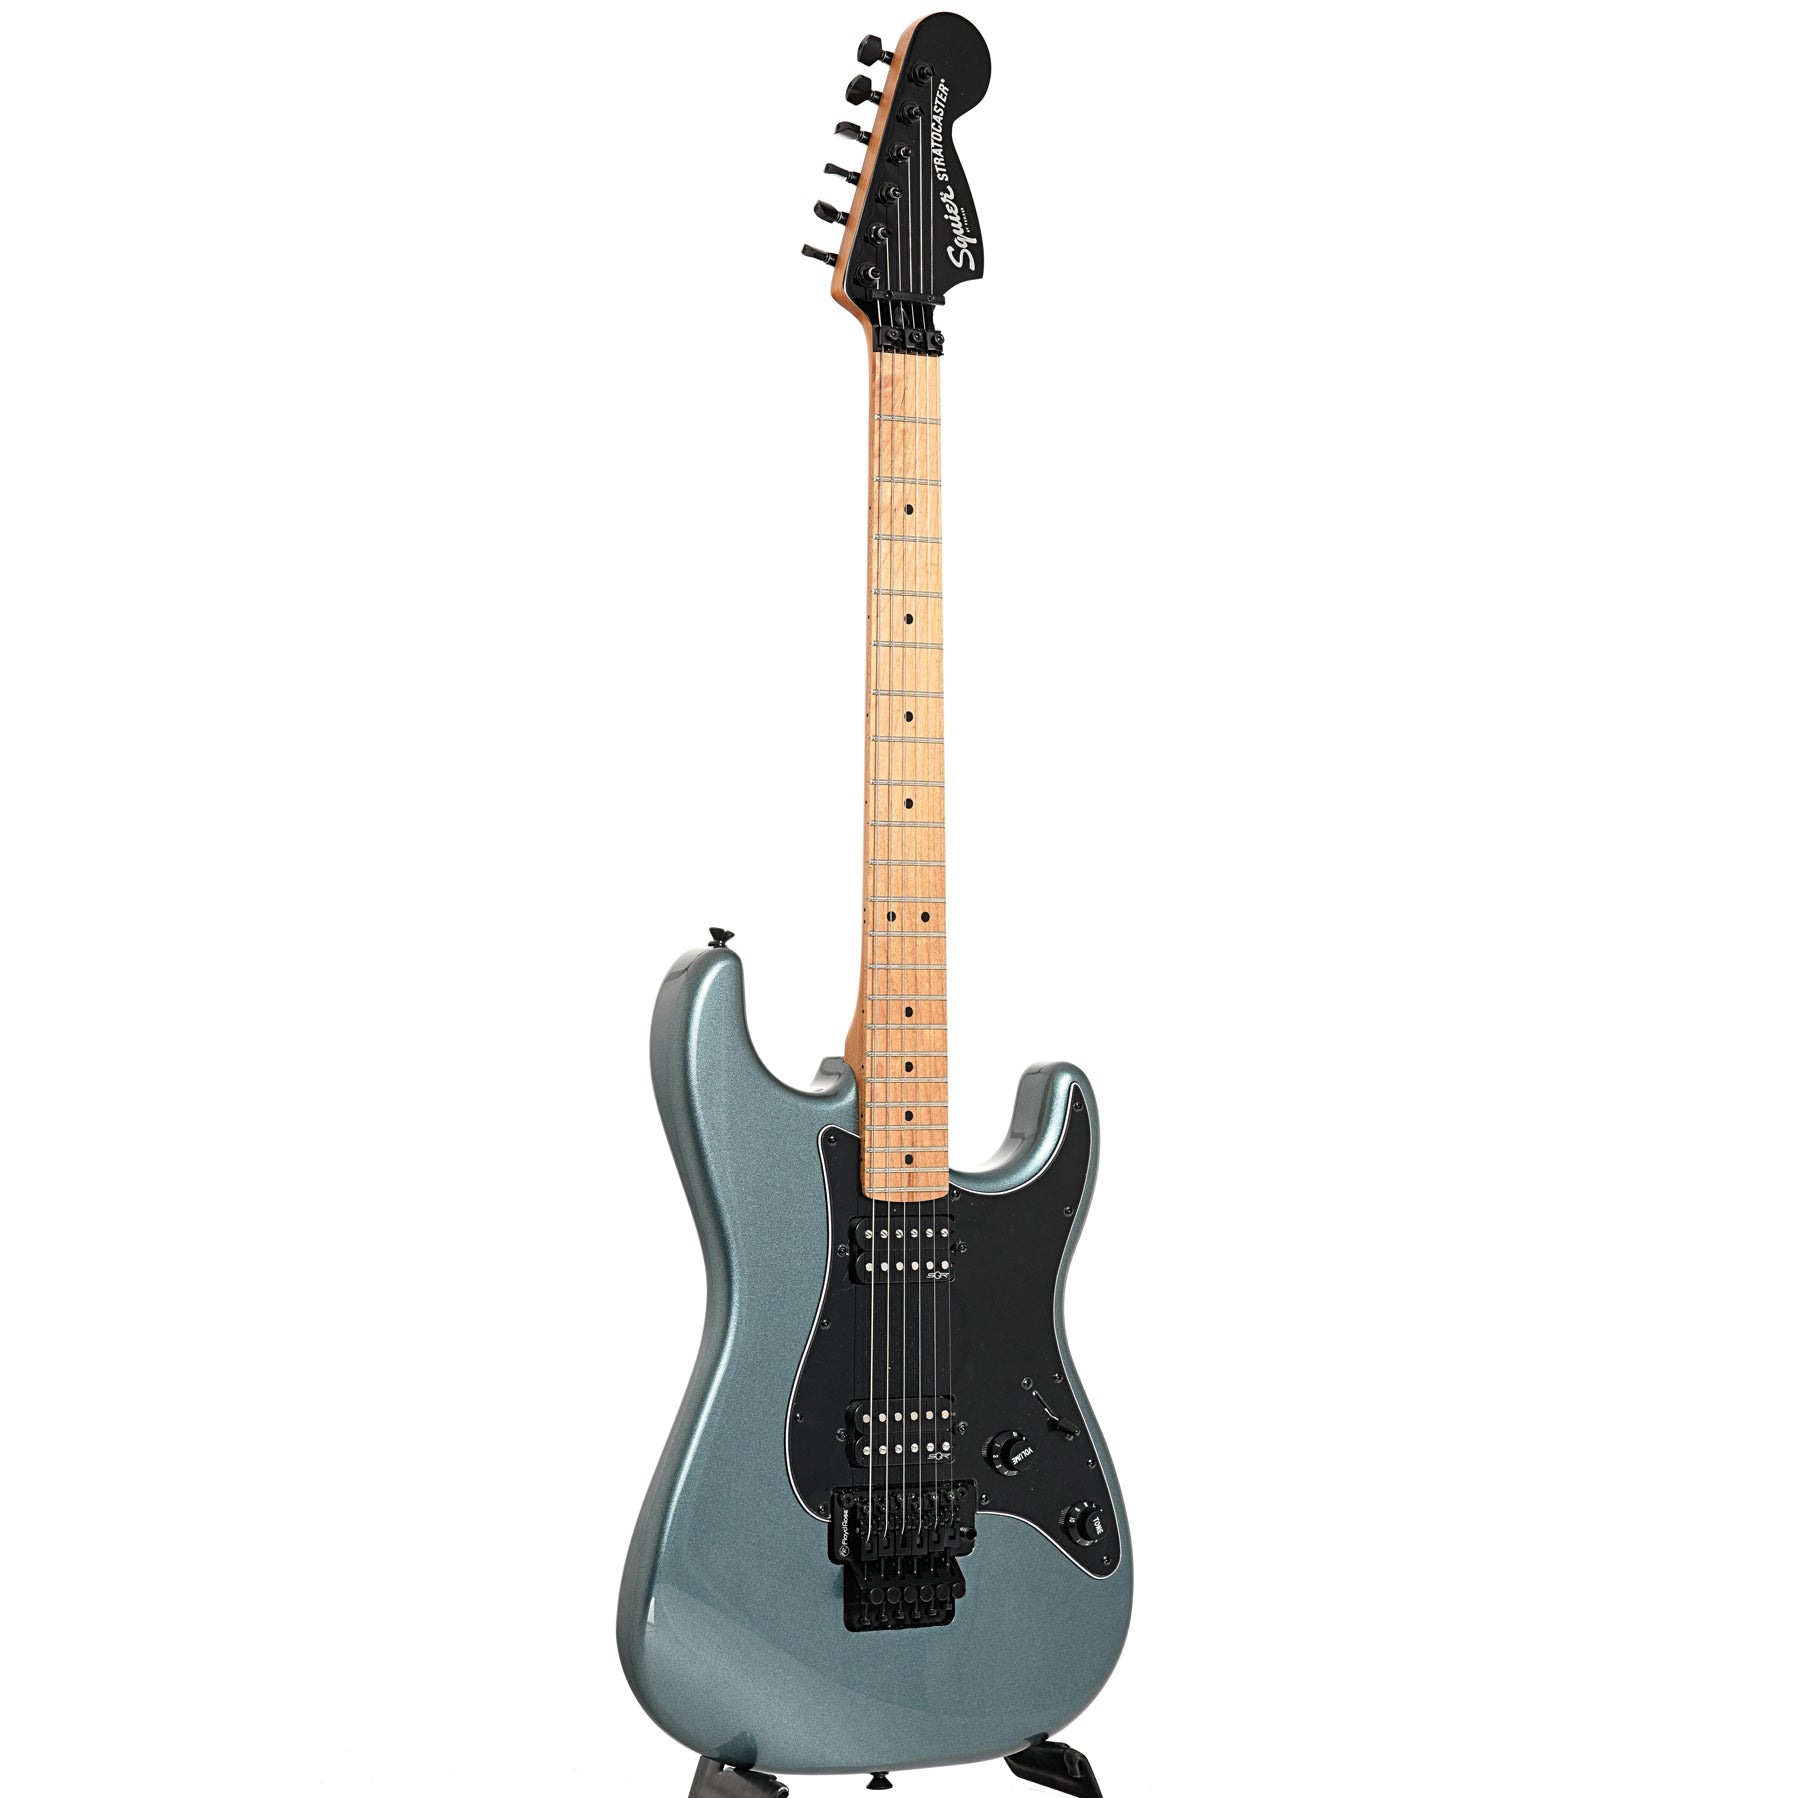 Image 11 of Squier Contemporary Stratocaster HH FR, Gunmetal Metallic - SKU# SCSHHFR : Product Type Solid Body Electric Guitars : Elderly Instruments